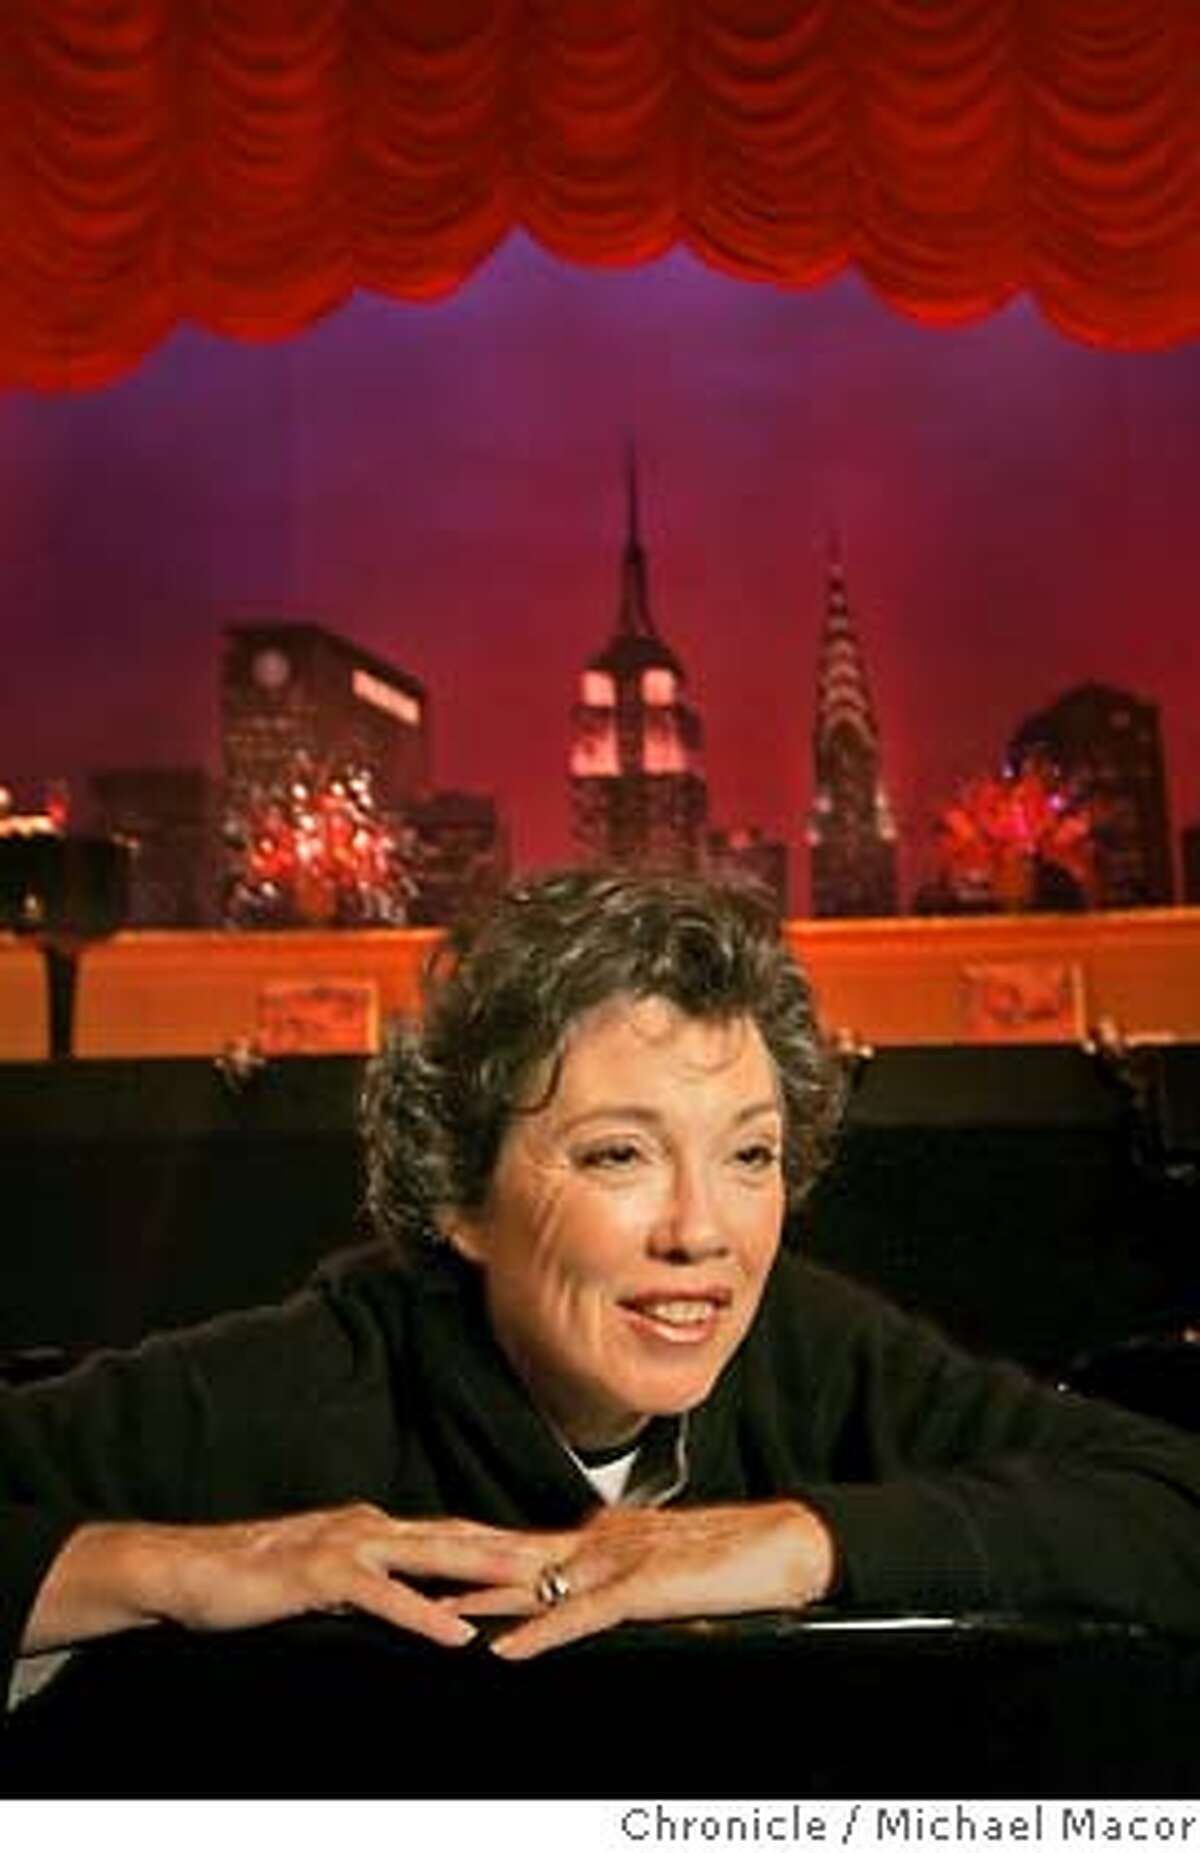 carole034_mac}.jpg Shorenstein Hays against a skyline of New York City, the backdrop to a production currently at the Curran Theater in SF. Theatrical Producer Carole Shorenstein Hays. 9/30/04 Michael Macor / San Francisco Chronicle Mandatory Credit for Photographer and San Francisco Chronicle/ - Magazine Out Magazine#Magazine#SundayMagazine#10-31-2004#ALL#Advance##0422385186